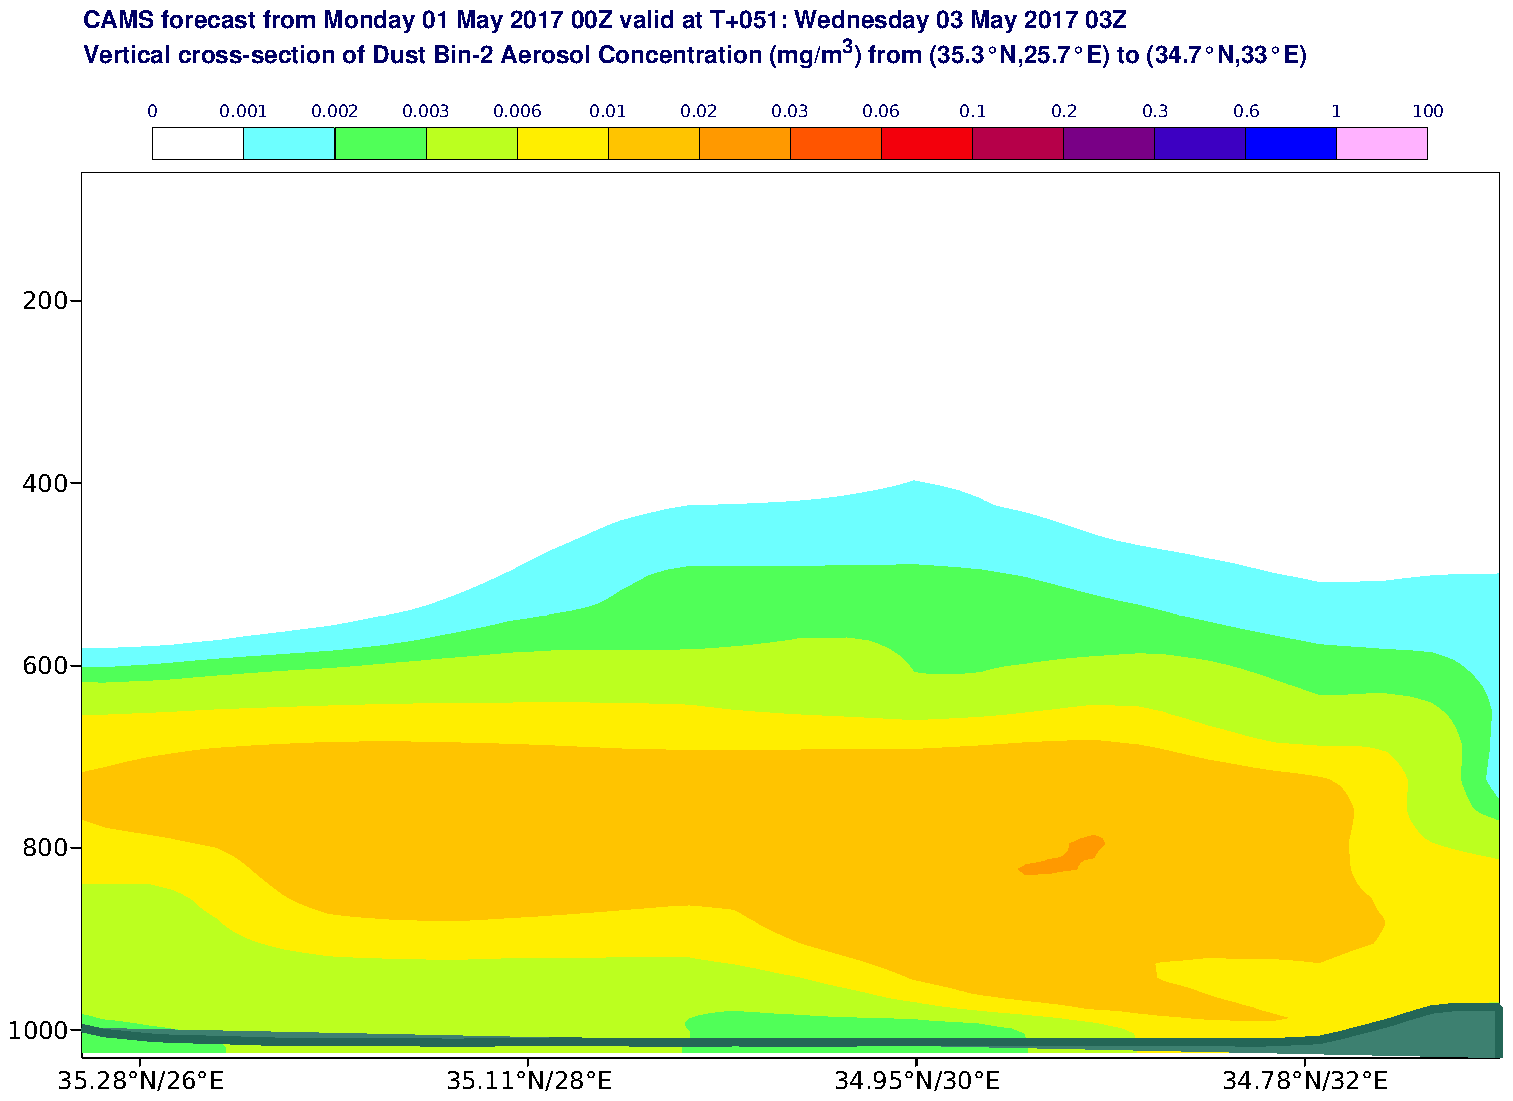 Vertical cross-section of Dust Bin-2 Aerosol Concentration (mg/m3) valid at T51 - 2017-05-03 03:00